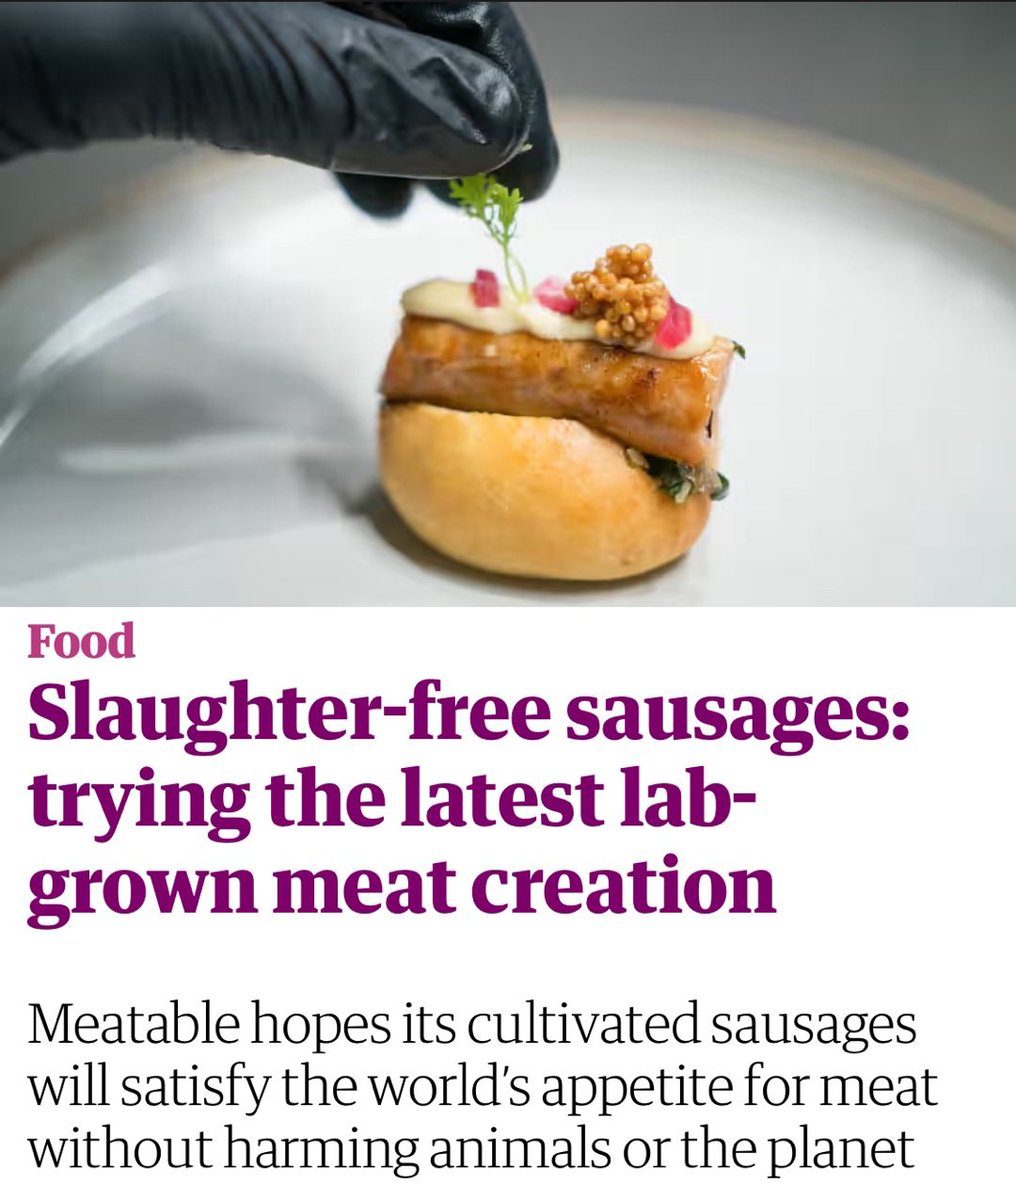 “Cultivated from cells plucked from a fertilised pig egg and grown inside steel fermentation vessels like those used to make beer...” A sausage made of 28% pork fat + textured pea, chickpea, soy, and wheat protein.